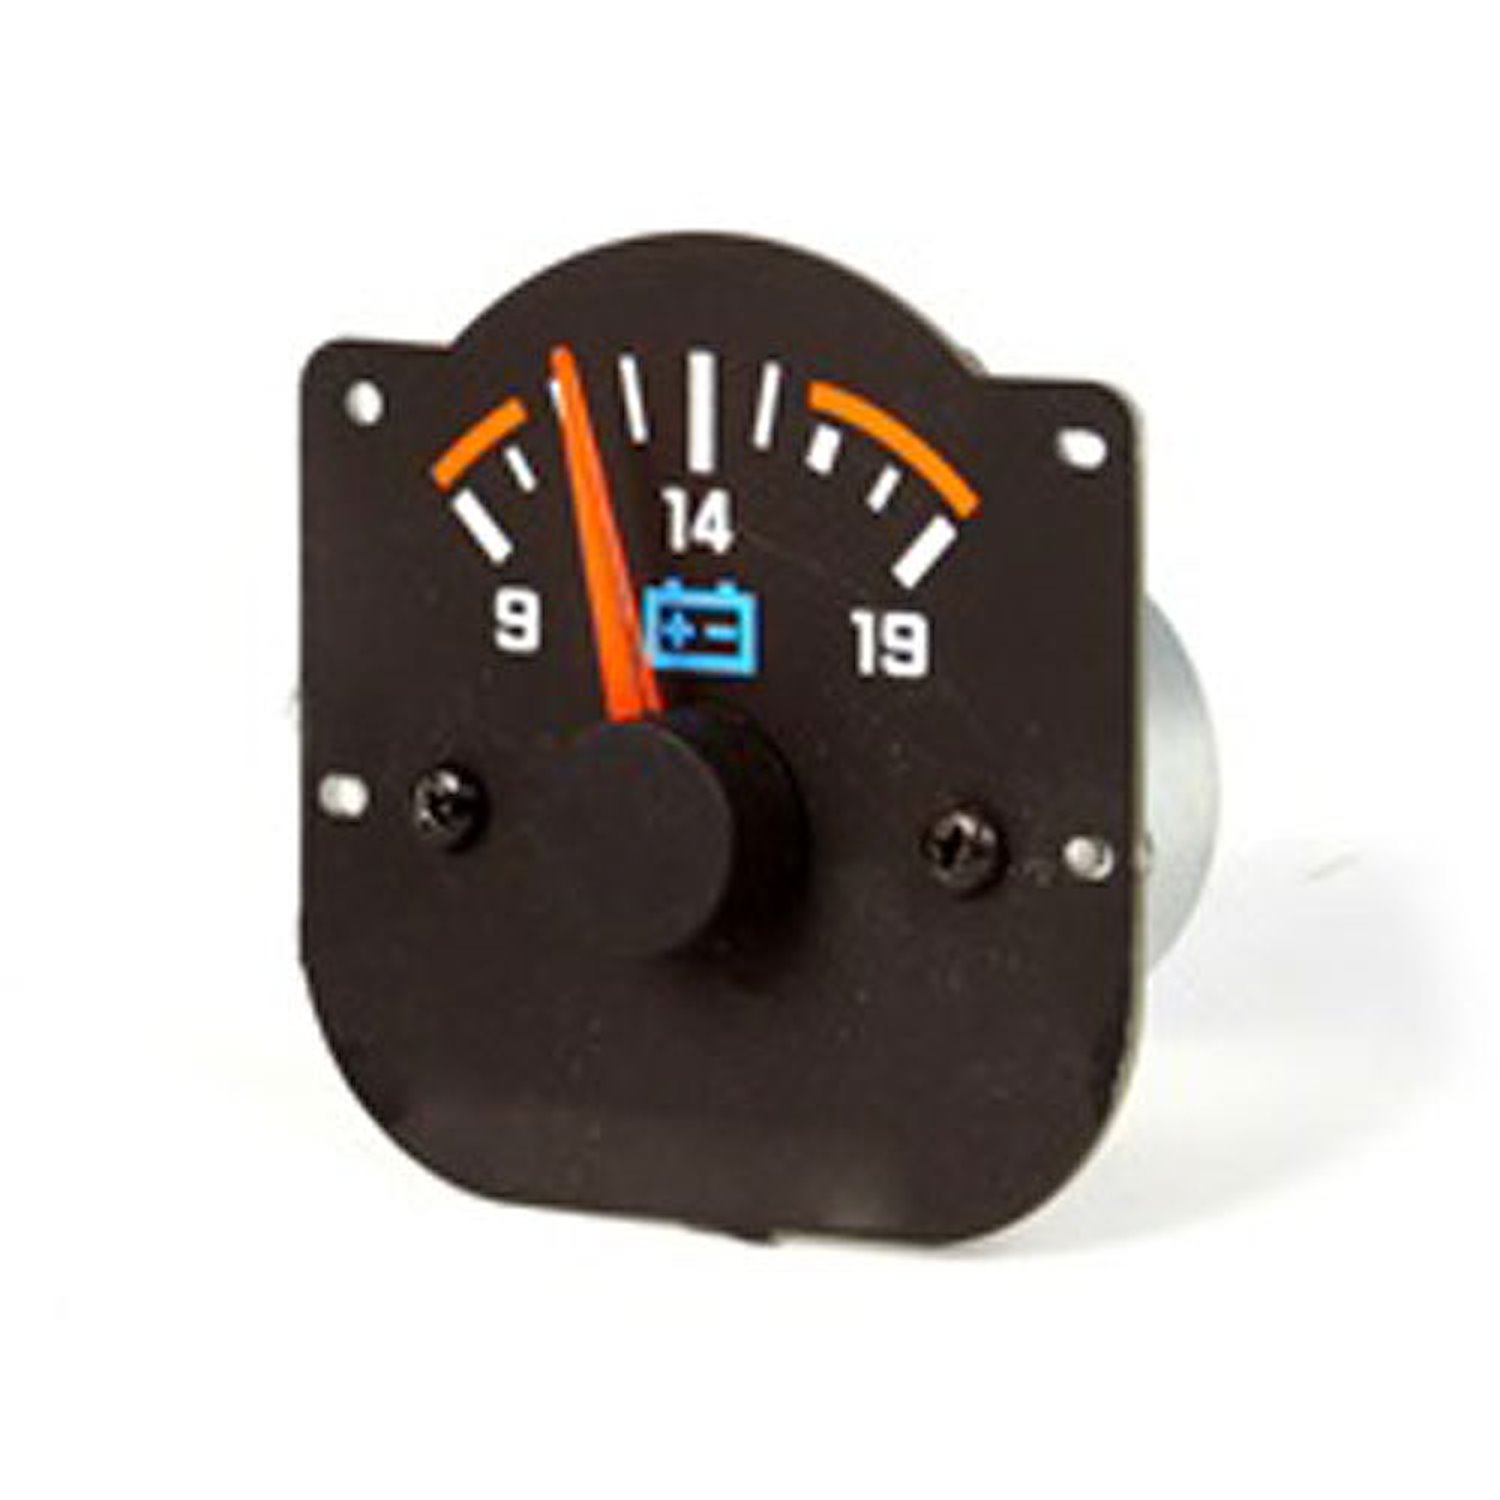 Replacement voltmeter gauge from Omix-ADA, Fits 87-91 Jeep Wranglers.